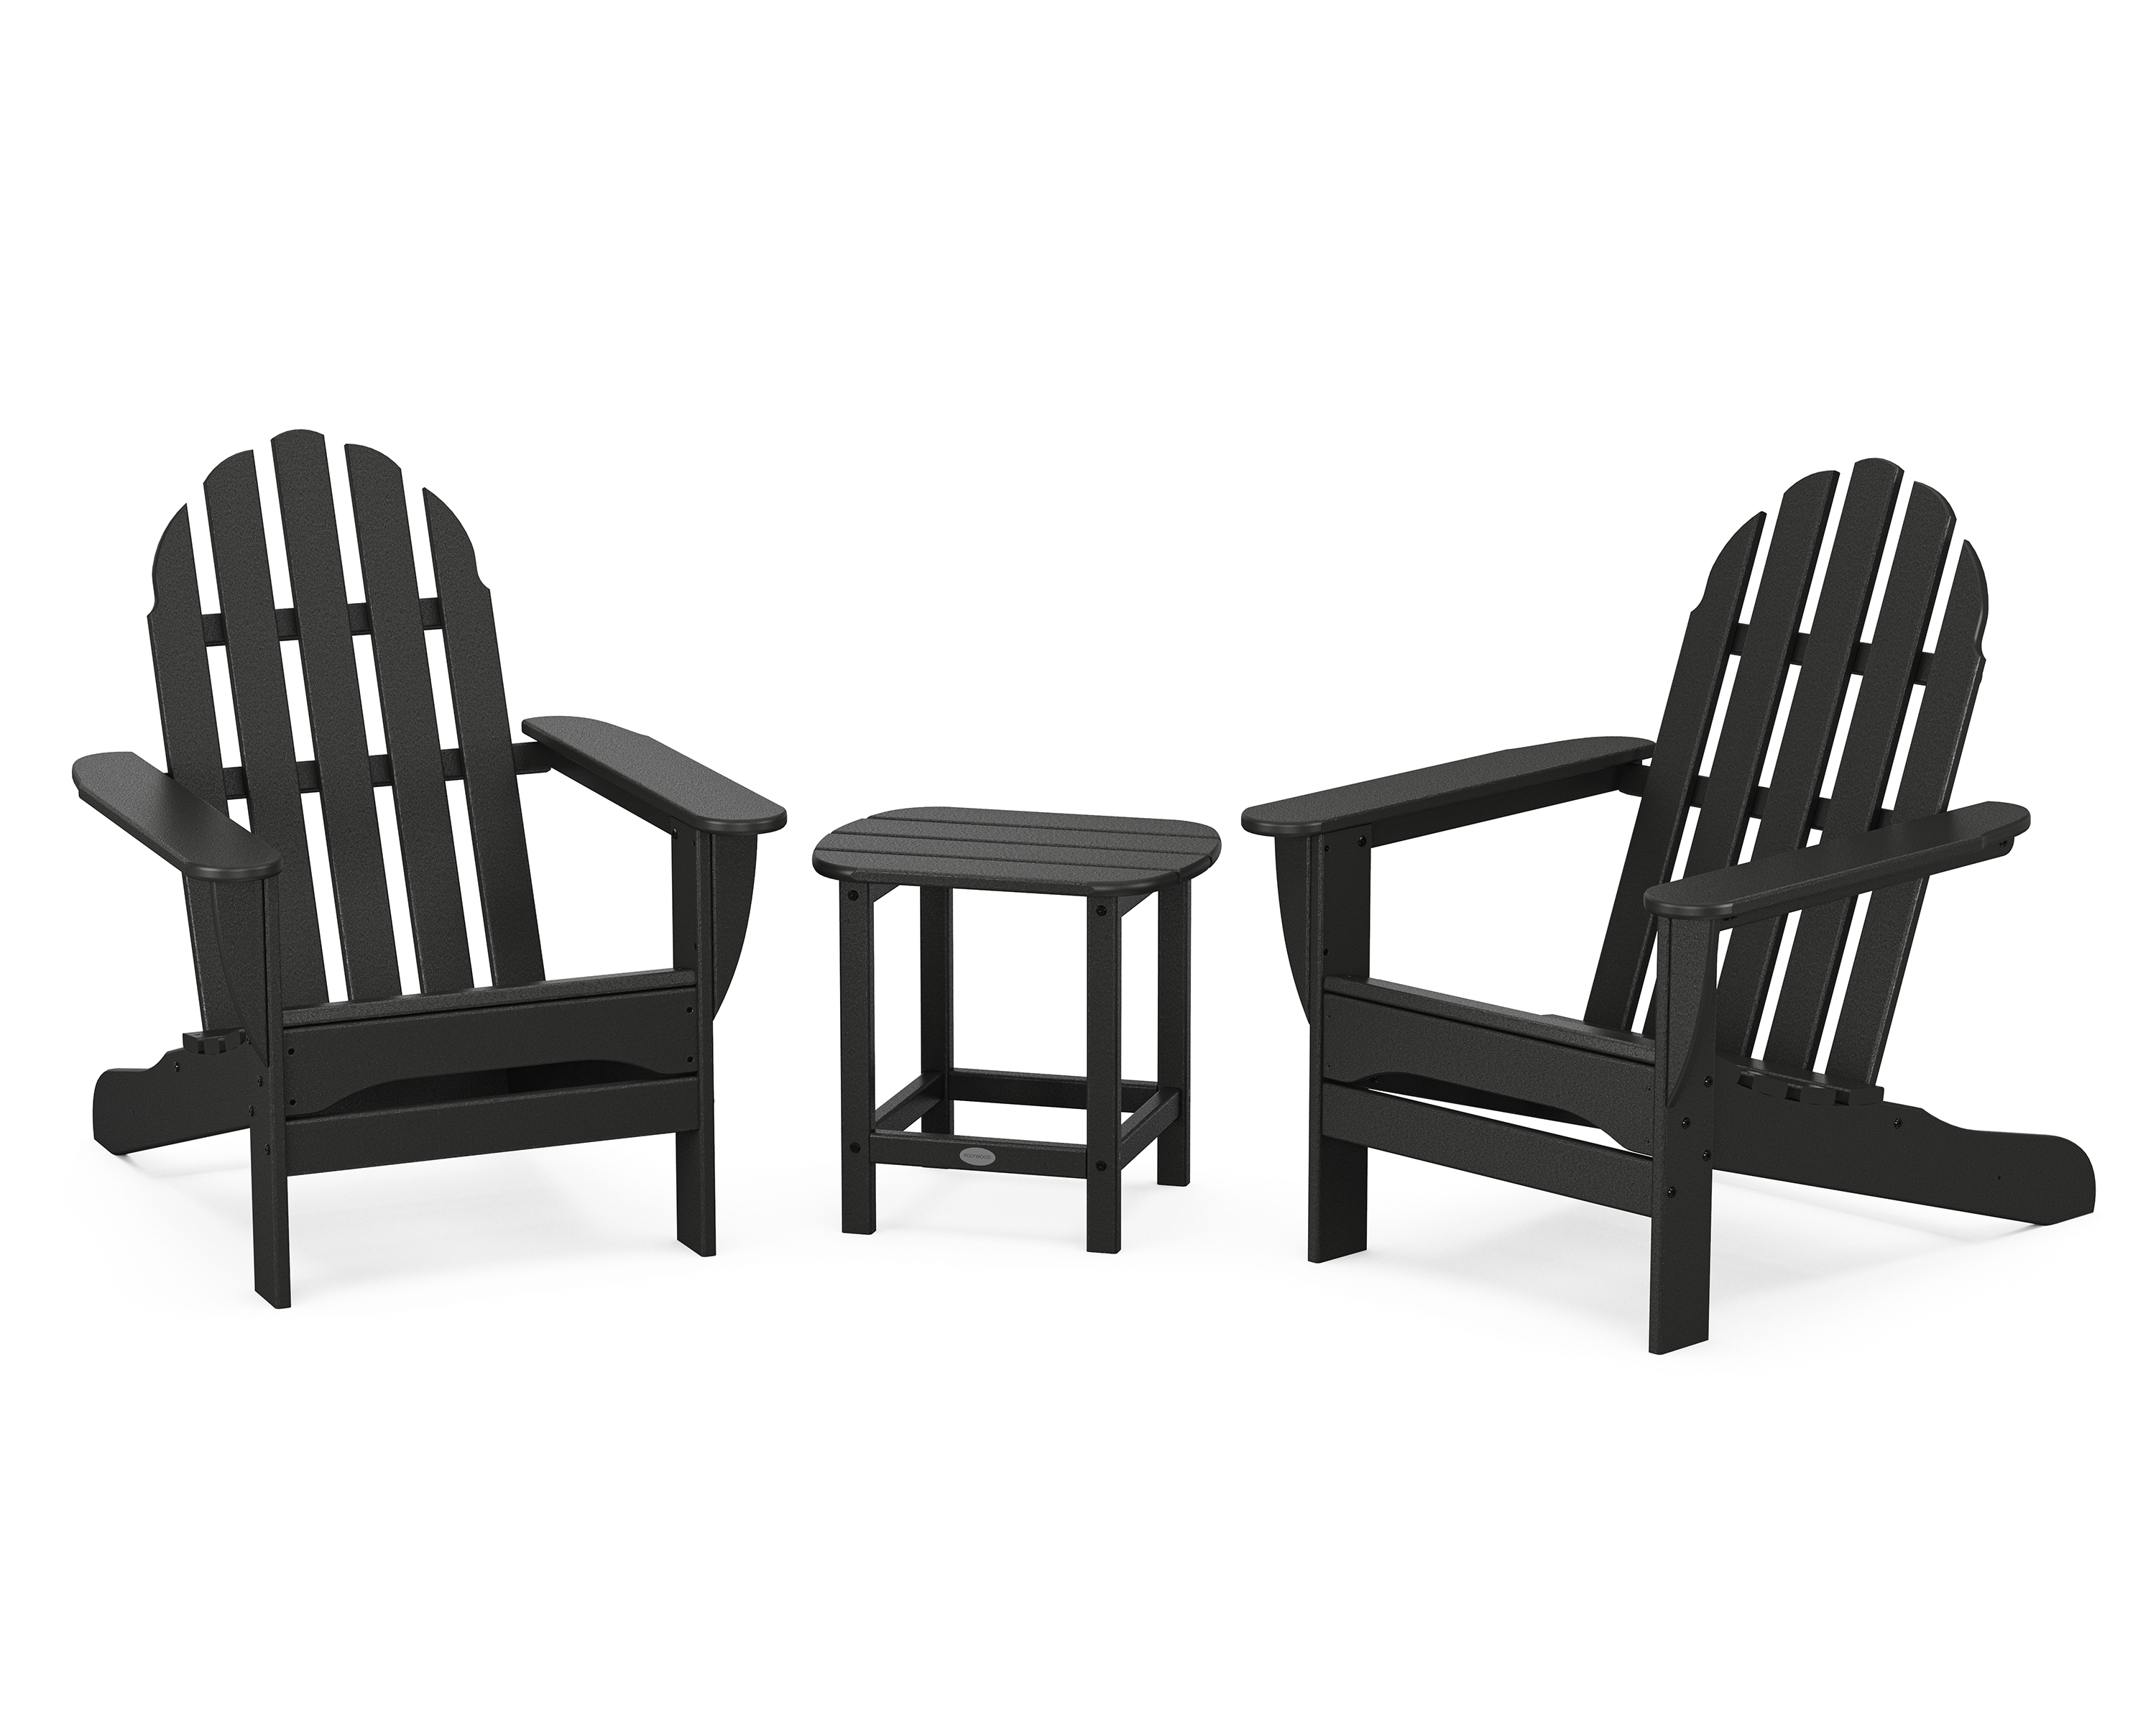 POLYWOOD Classic Adirondack 3-Piece Set with South Beach 18" Side Table in Black - image 1 of 5